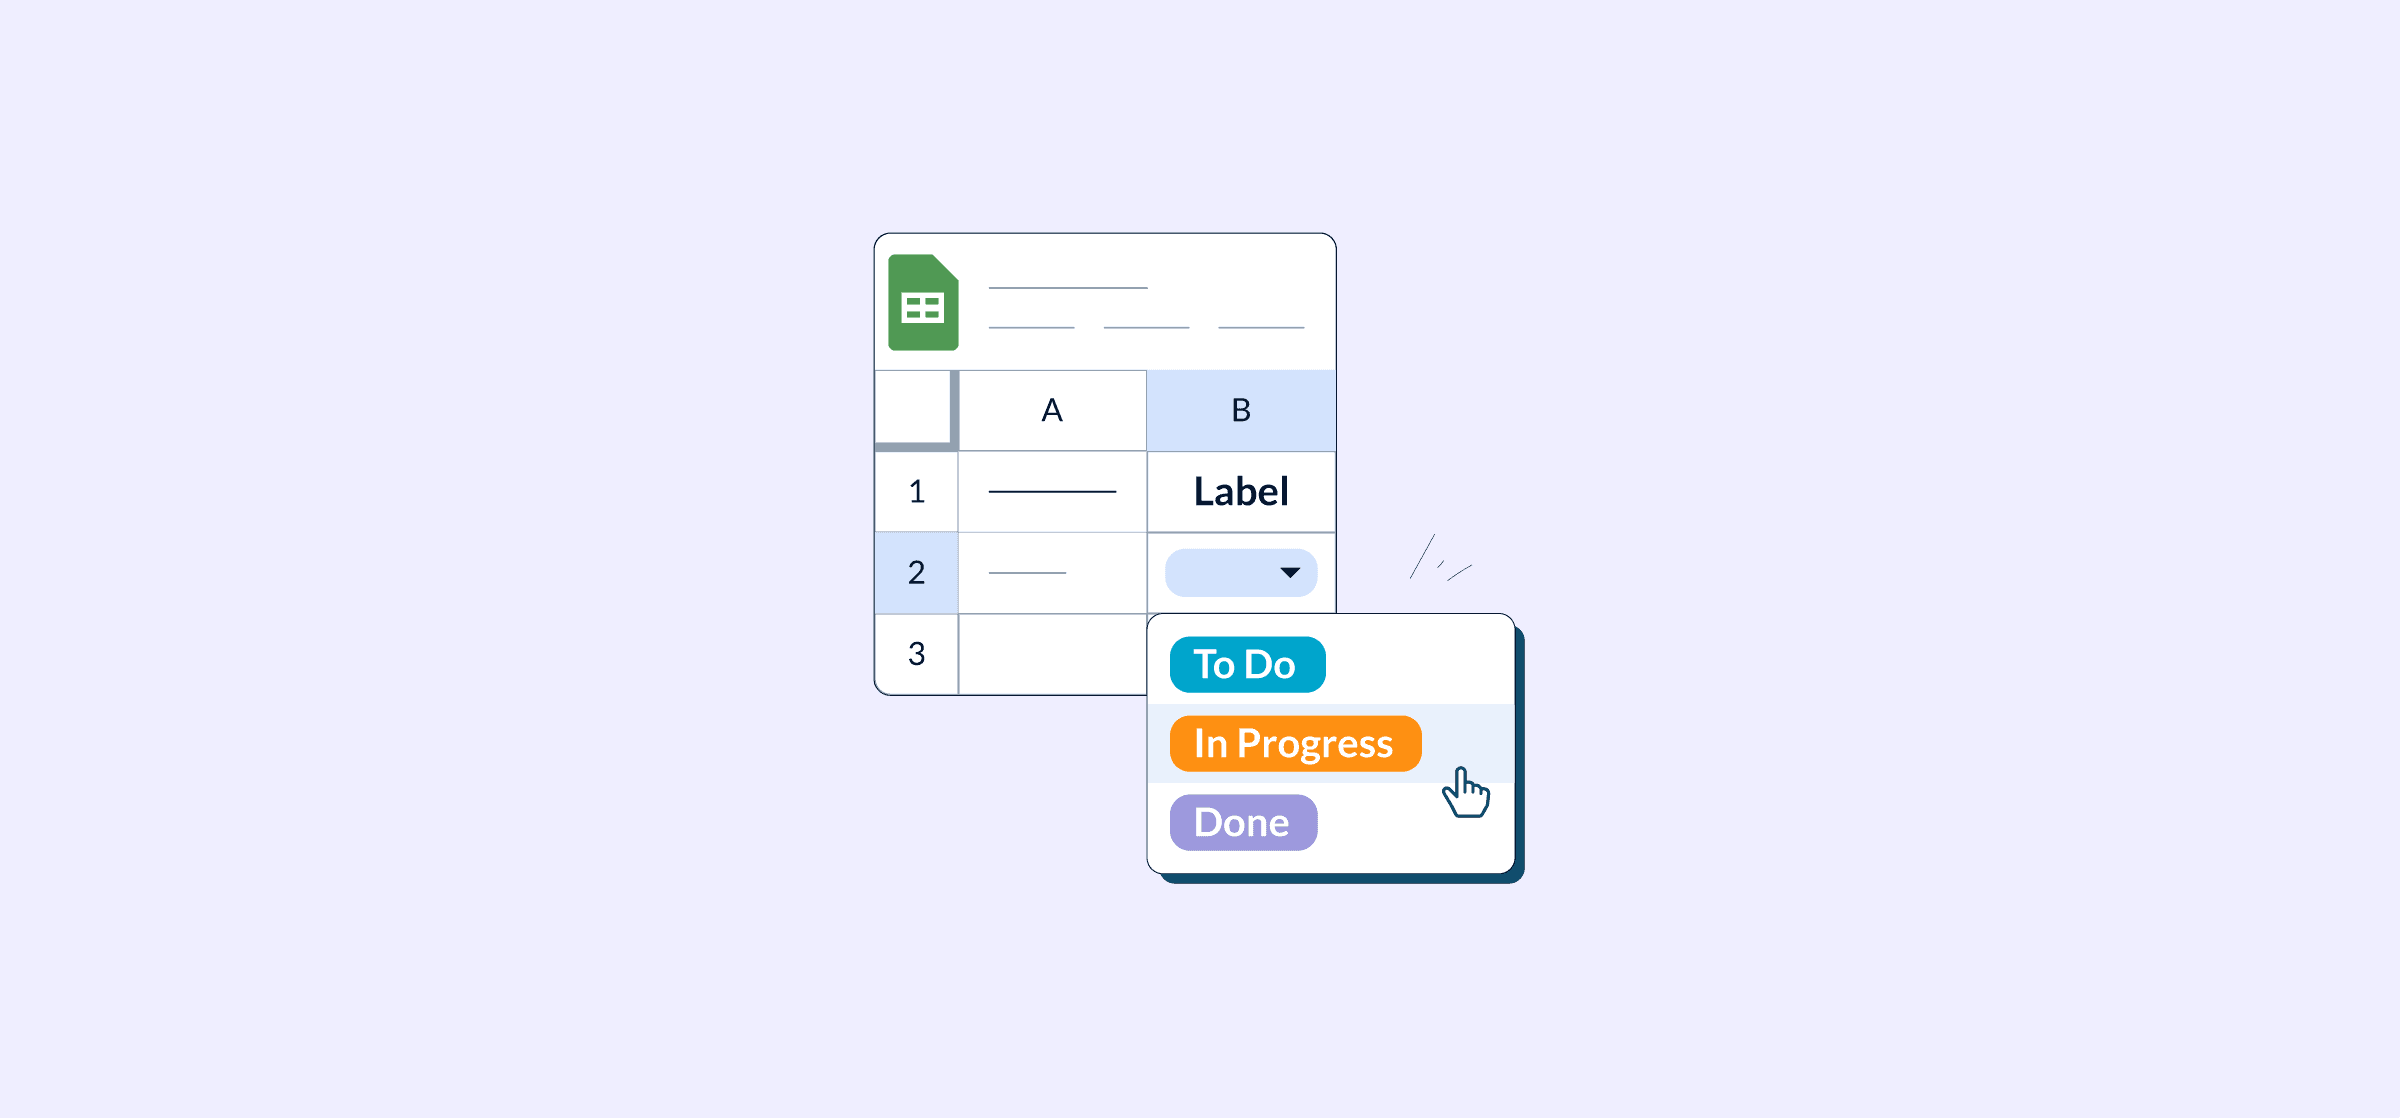 An illustration showing how to create a dropdown list in Google Sheets.